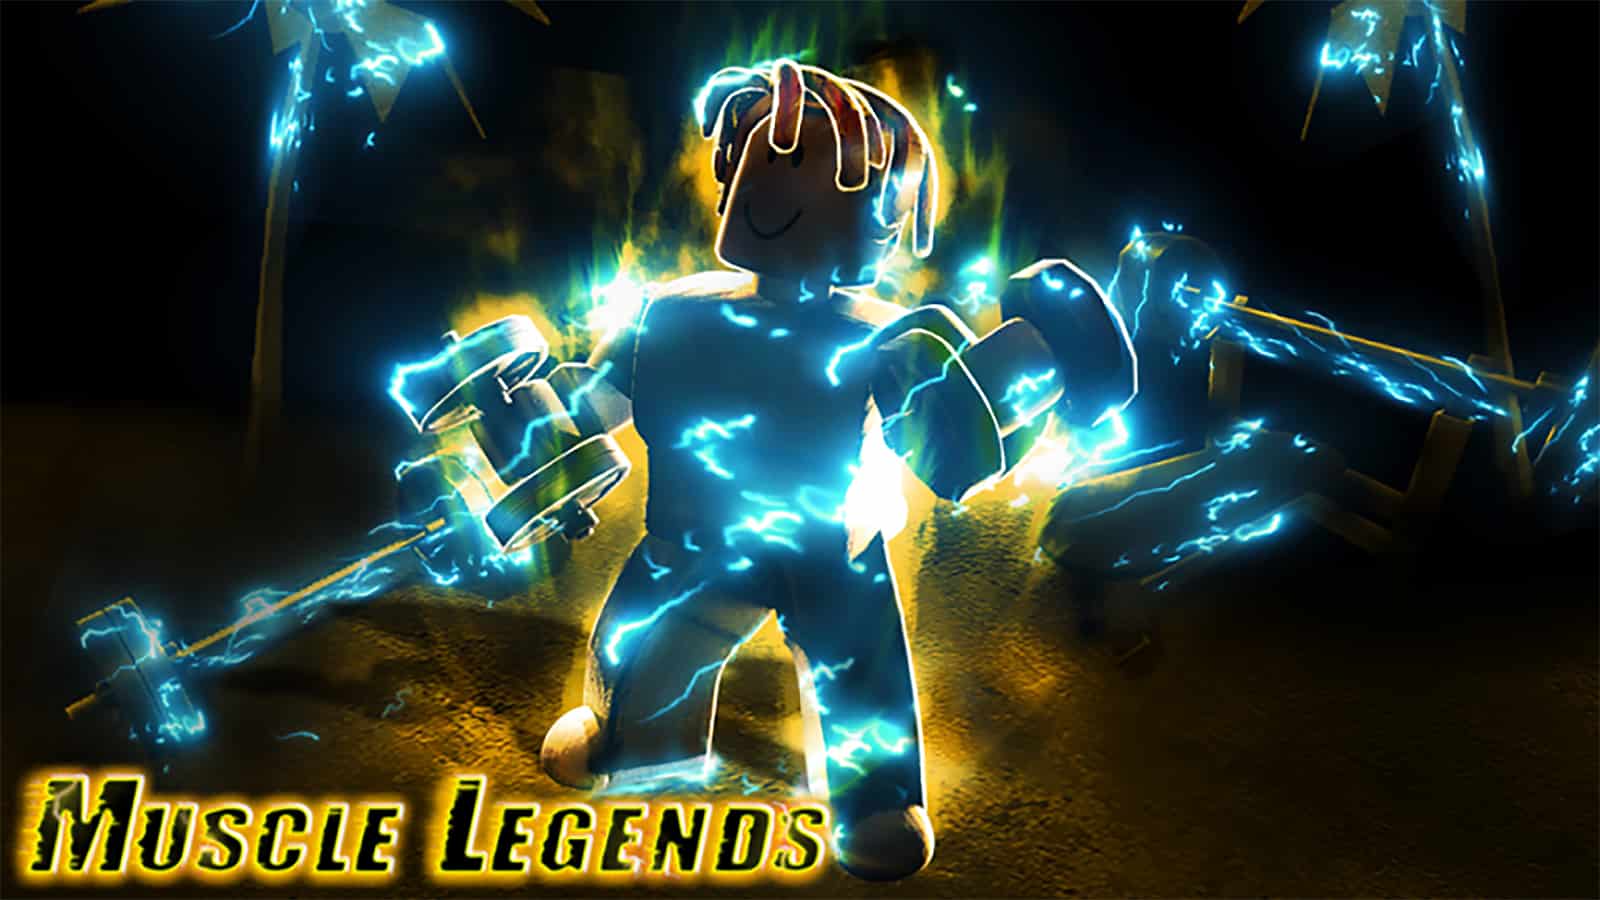 Roblox Legends of Speed codes (May 2023): Free Steps, Gems, more - Dexerto